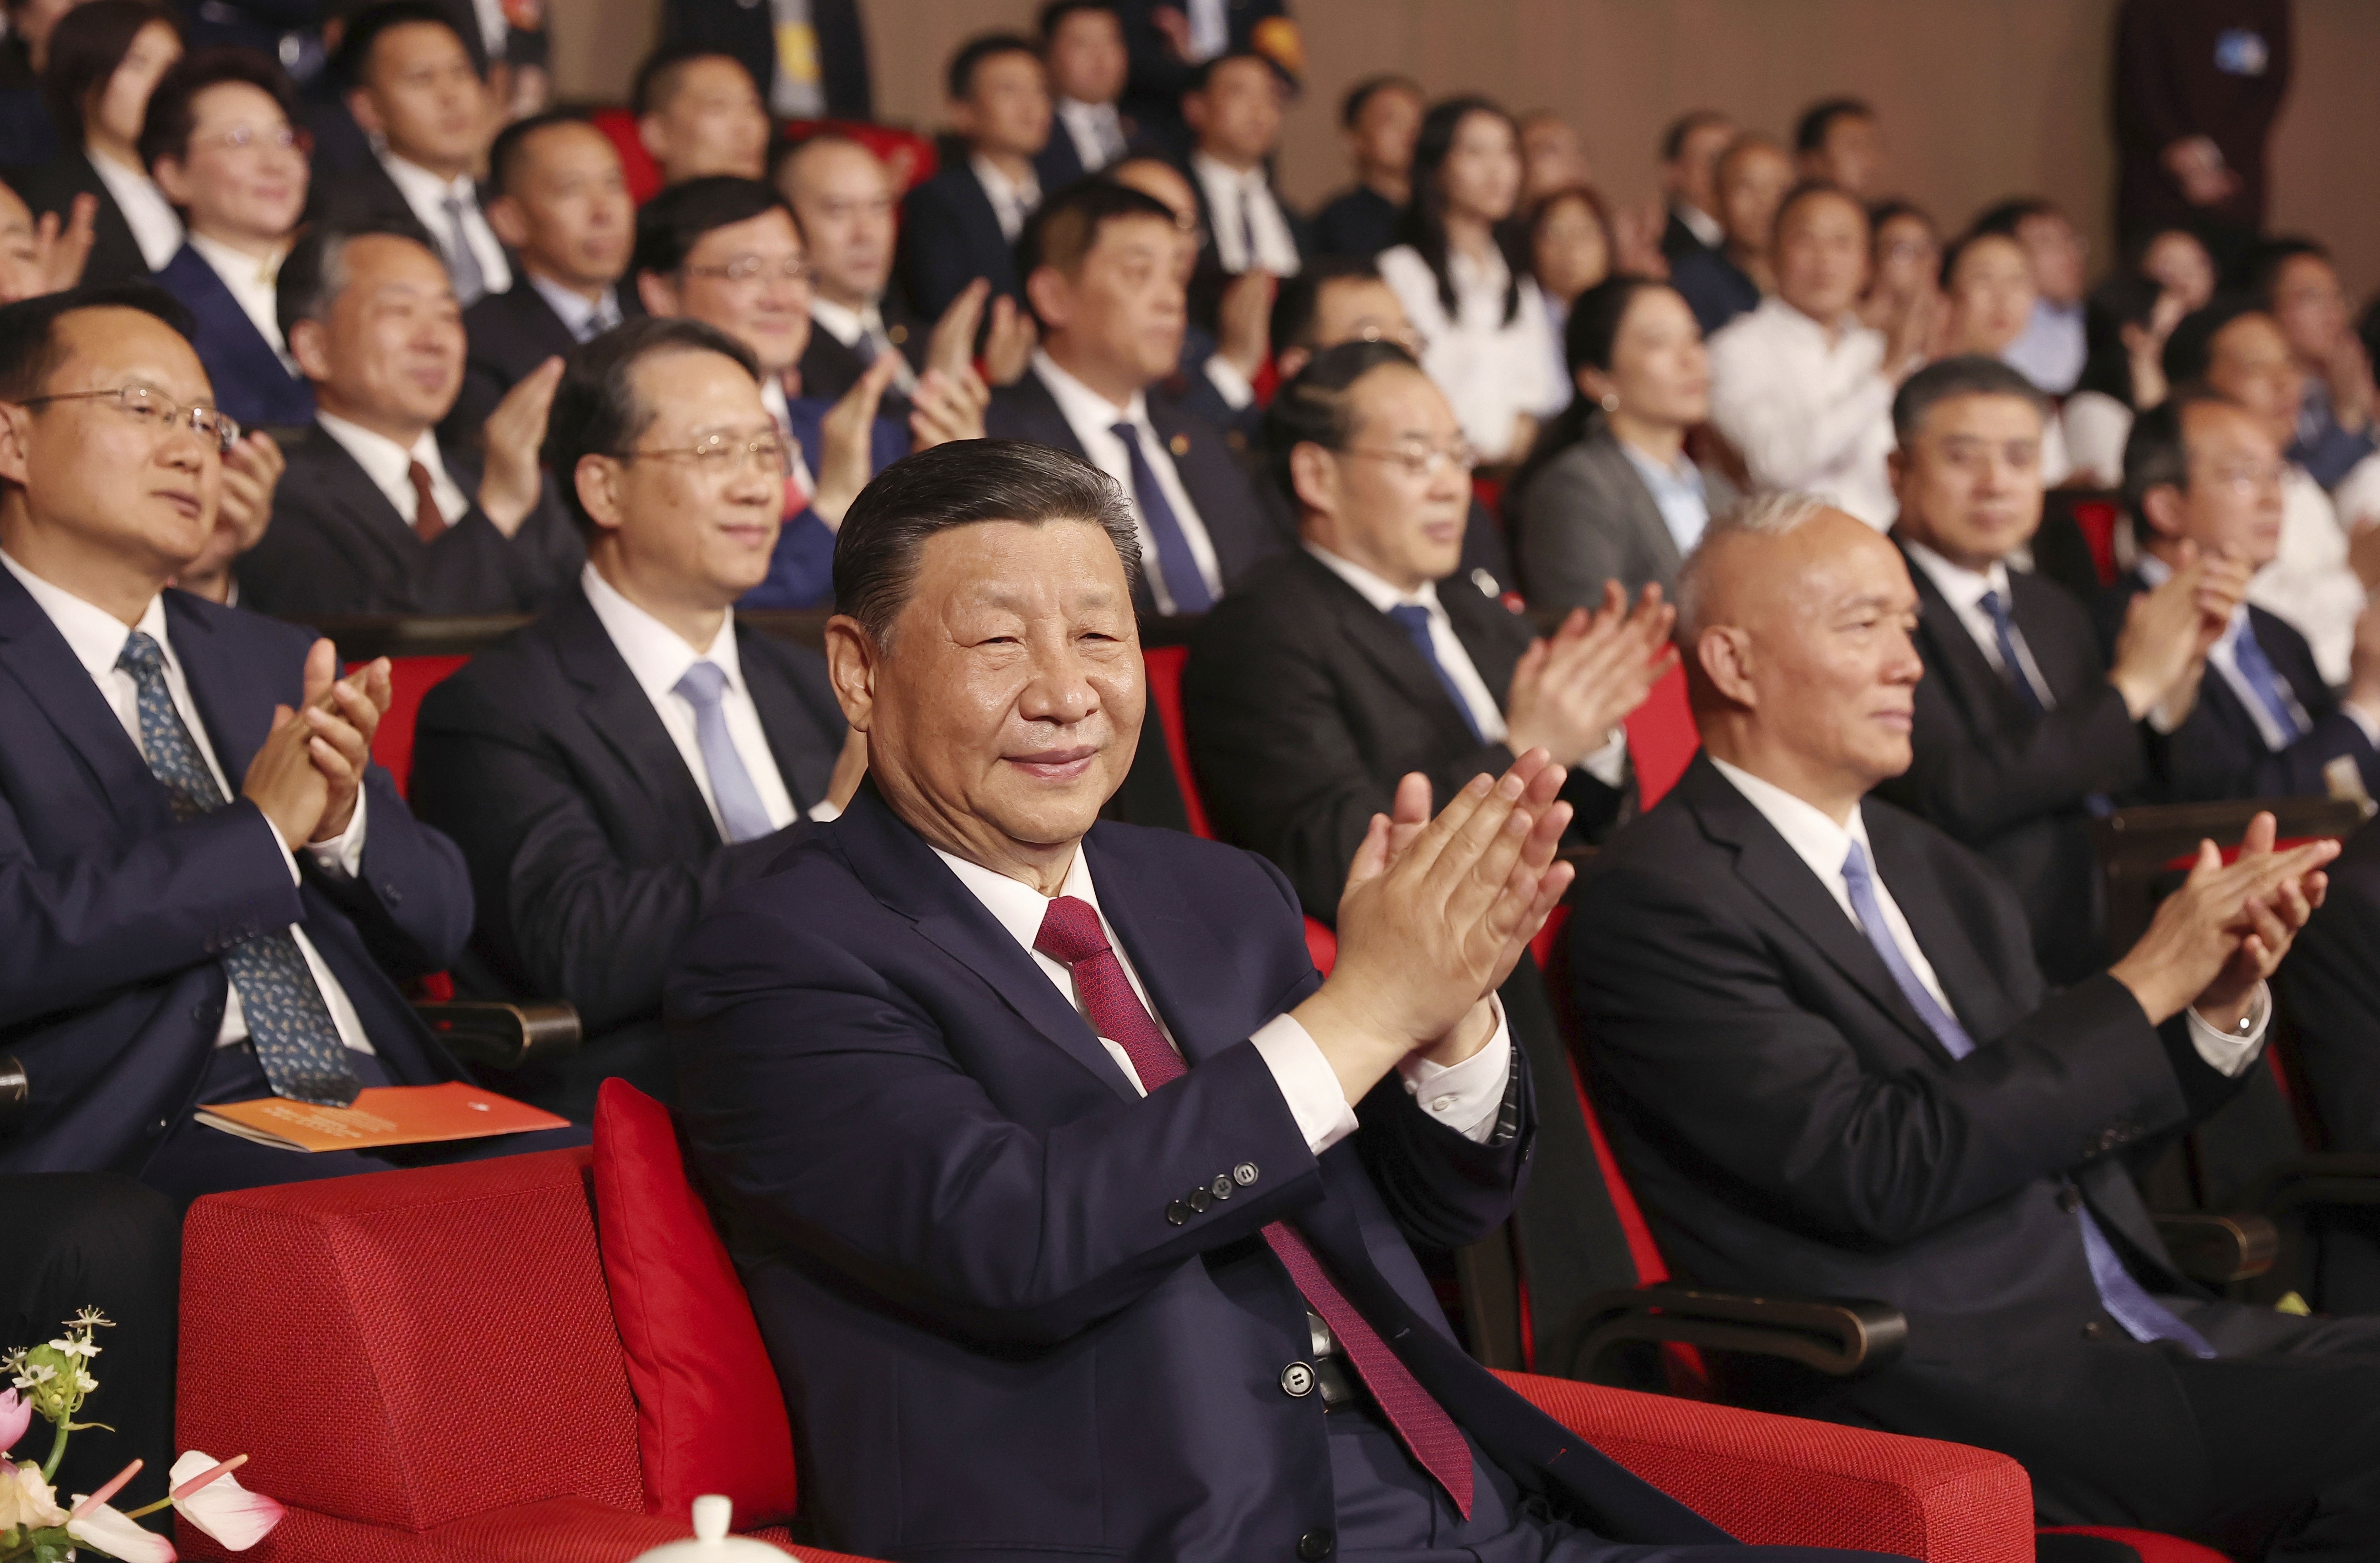 Sure, why not: China built a chatbot based on Xi Jinping